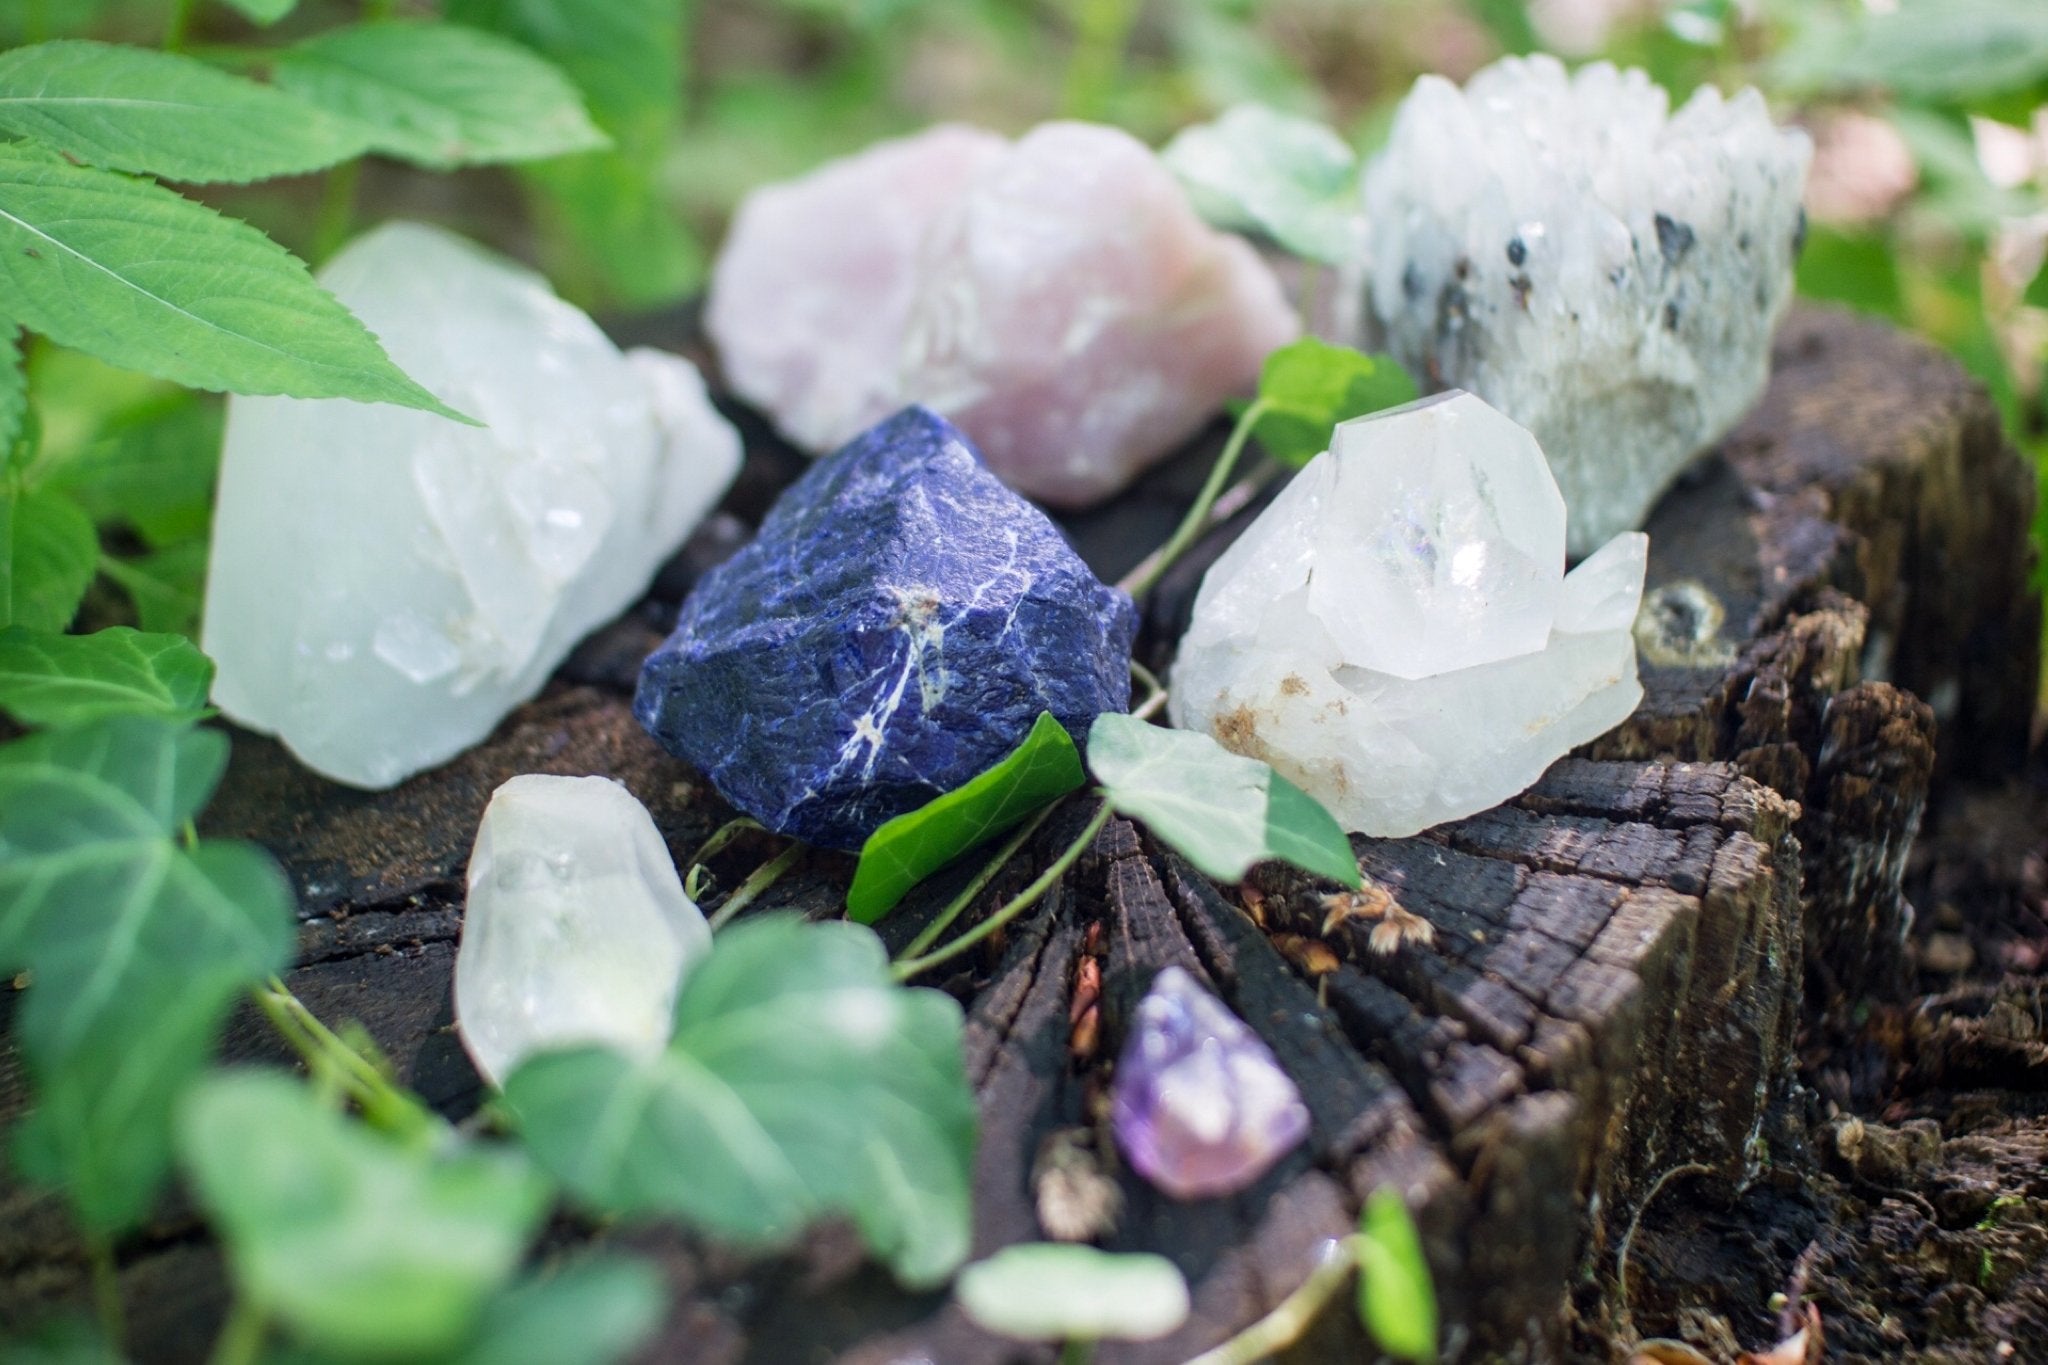 New To Using Herbs And Crystals? These 9 Botanicals & Gemstones Will Keep The Vibes High & Keep Negativity Away - Loose Leaf Tea Market